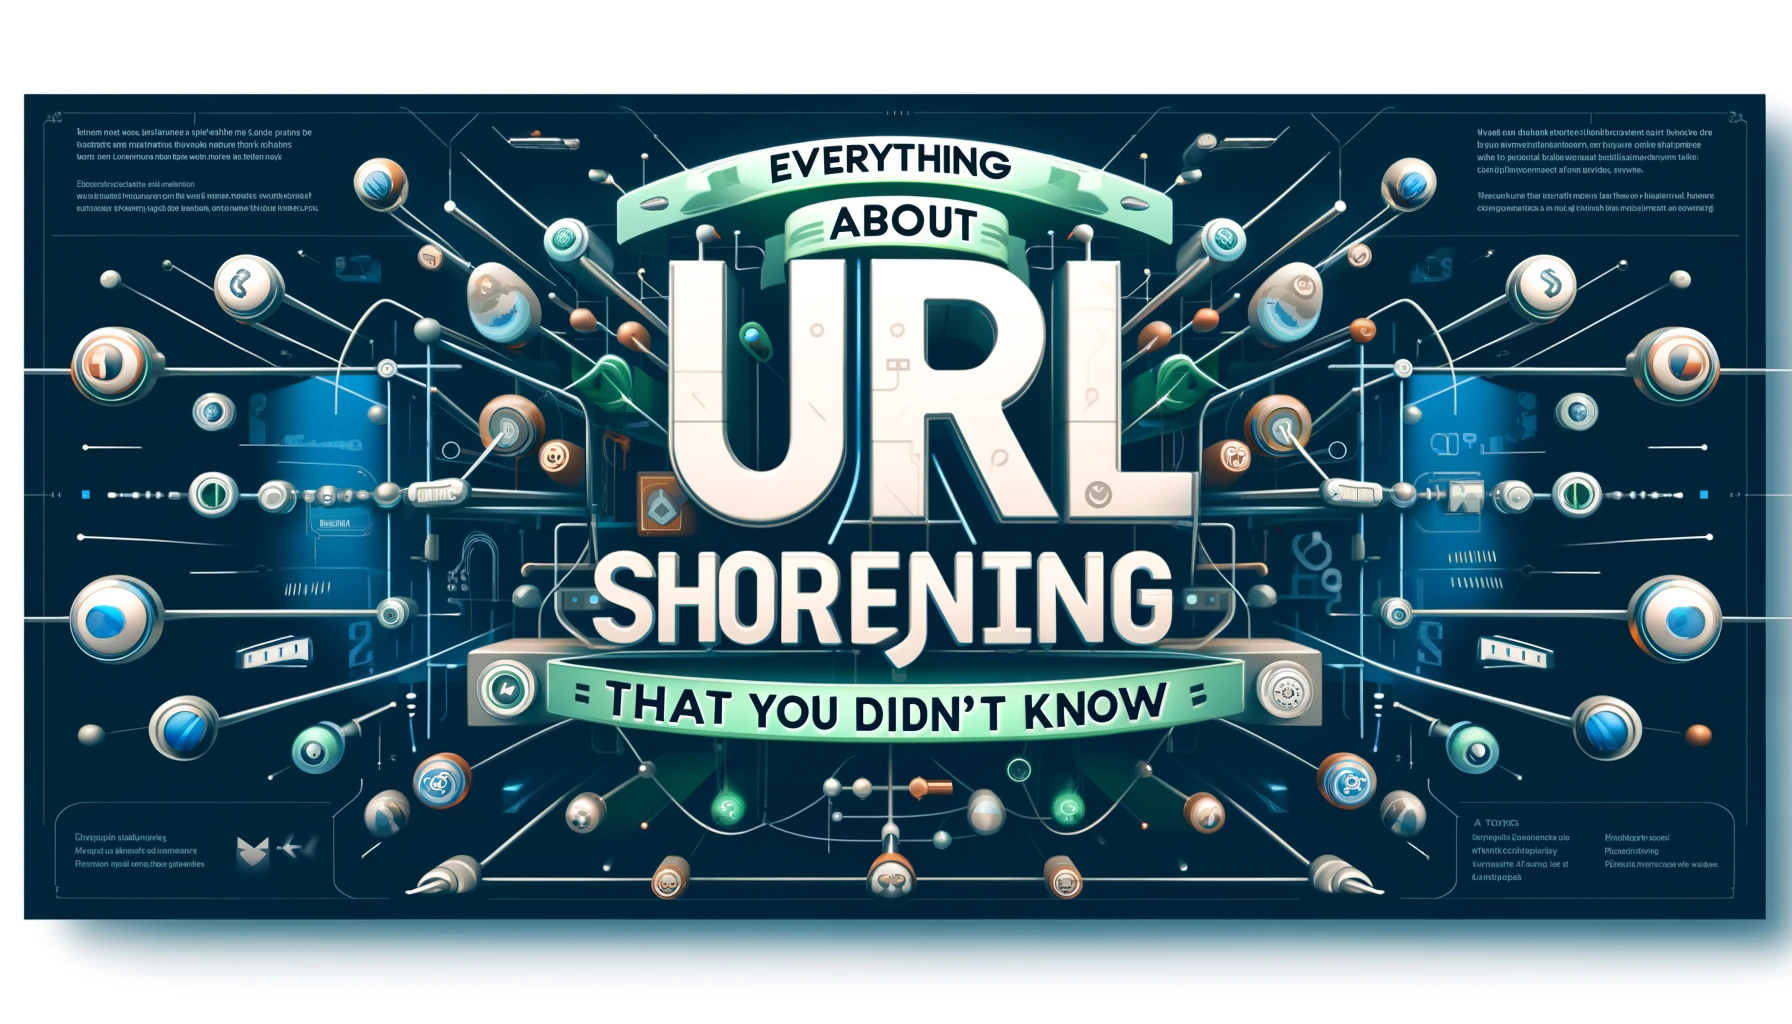 Everything about URL shortening that you didn't know